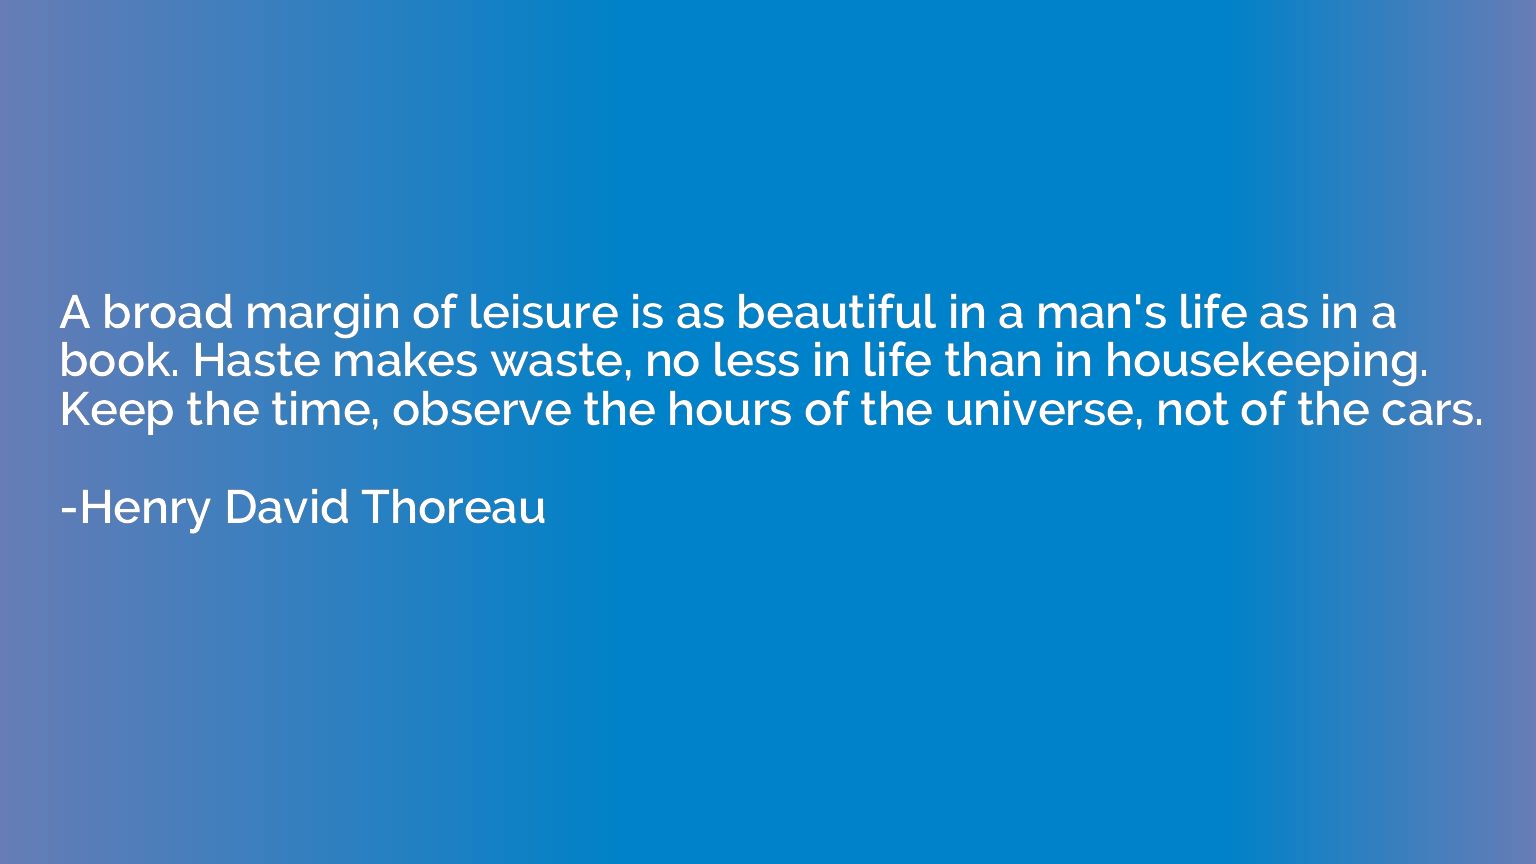 A broad margin of leisure is as beautiful in a man's life as